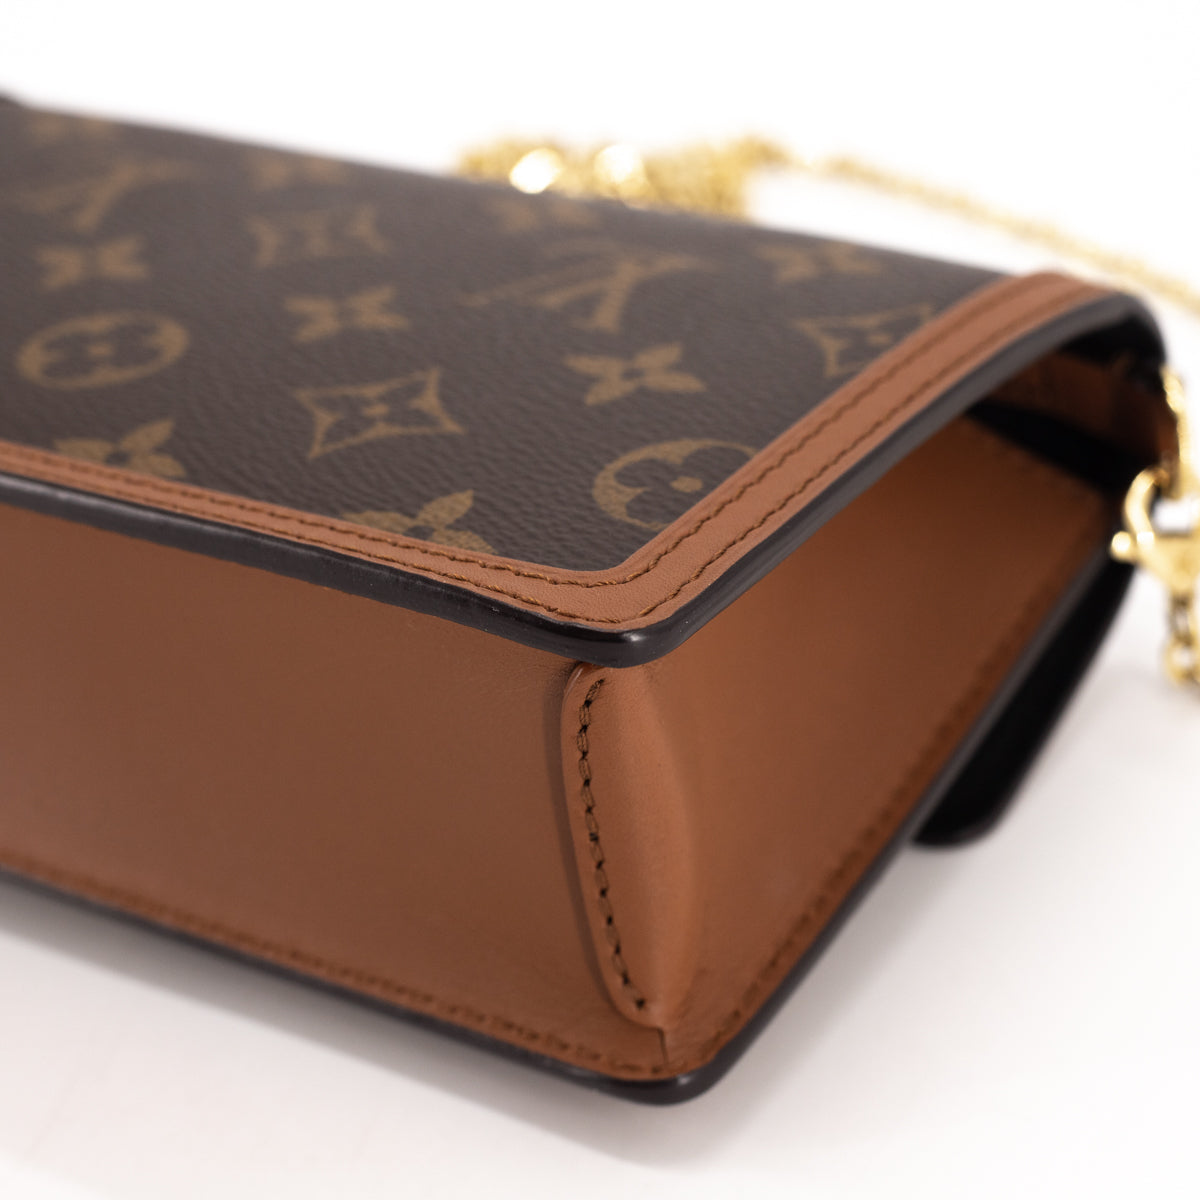 How An $800 Louis Vuitton Wallet Is Professionally Restored